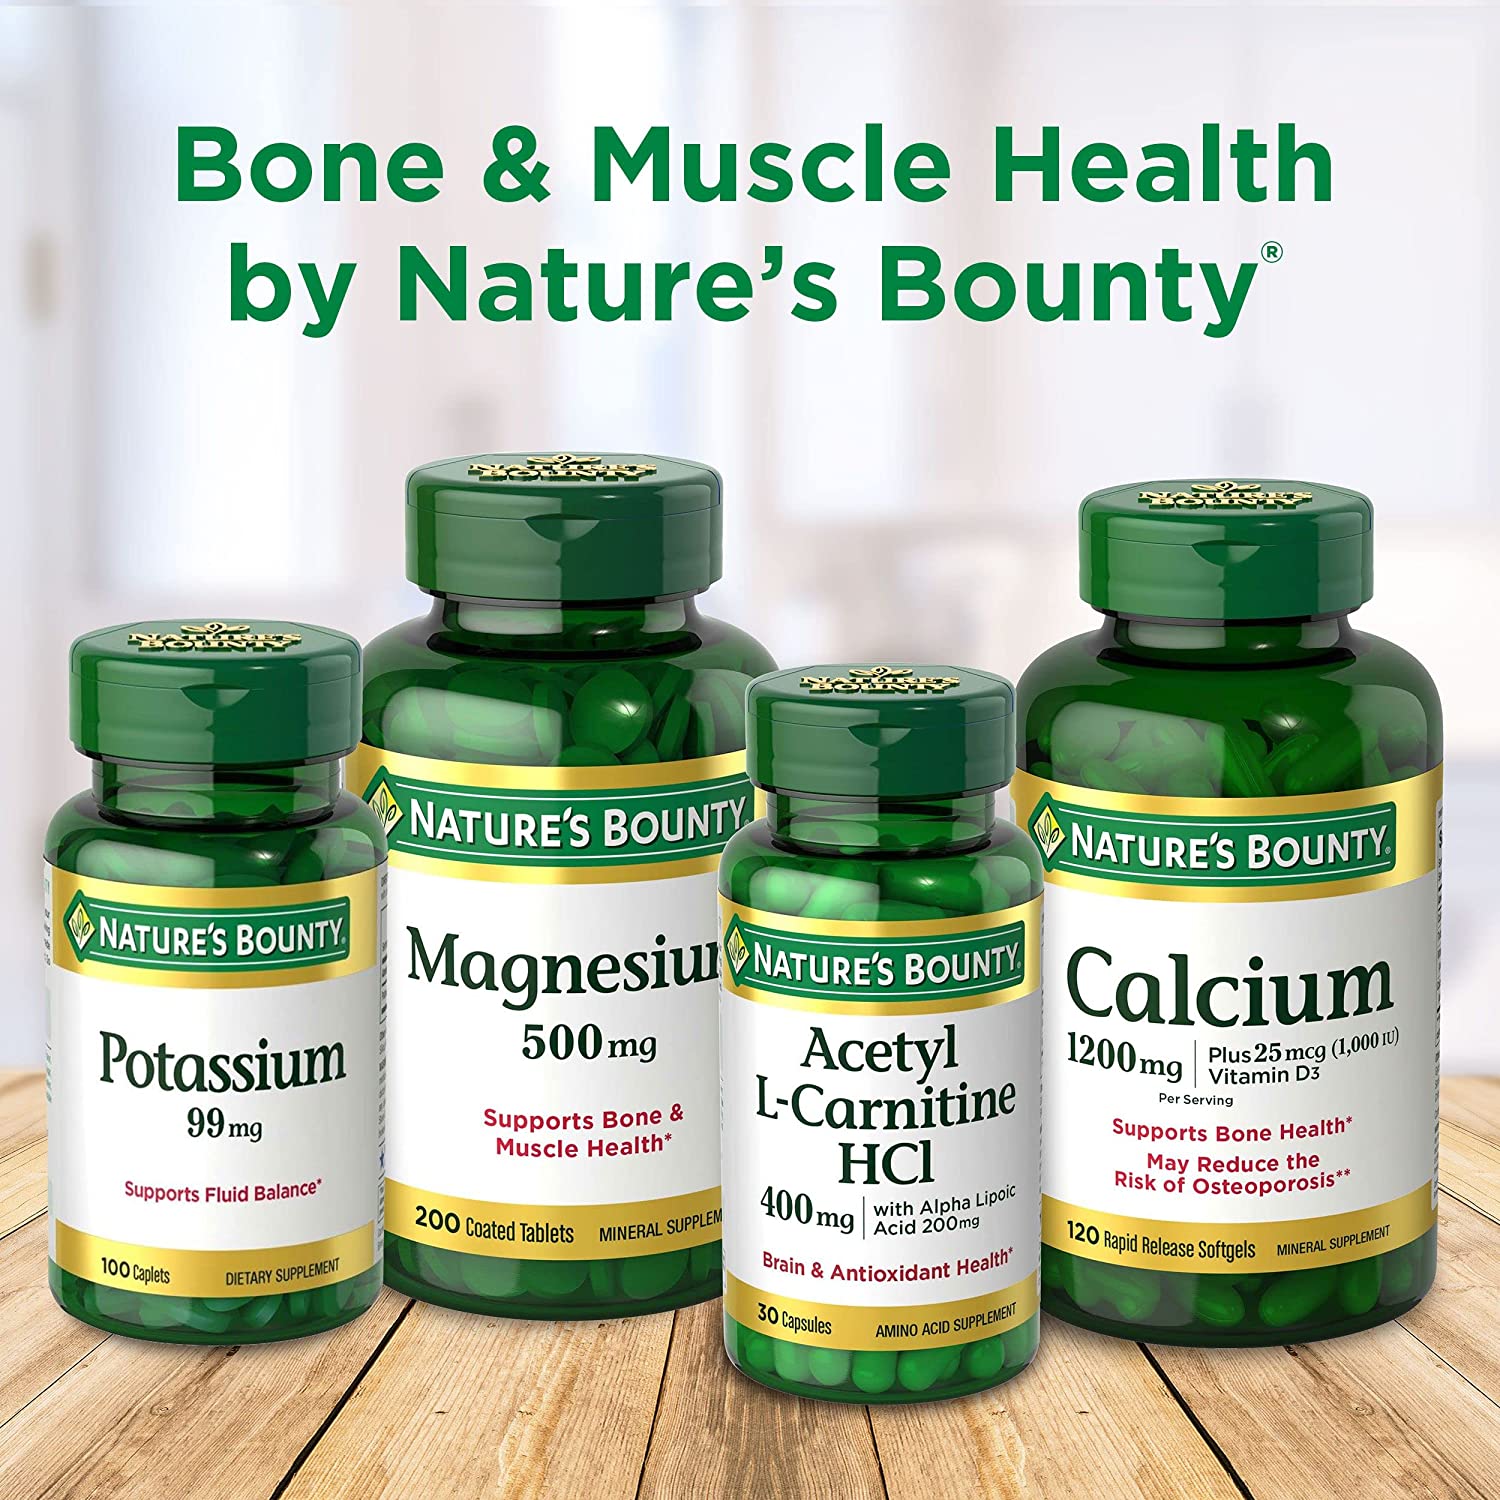 Nature’s Bounty Magnesium 500 mg - 200 Tablet-1